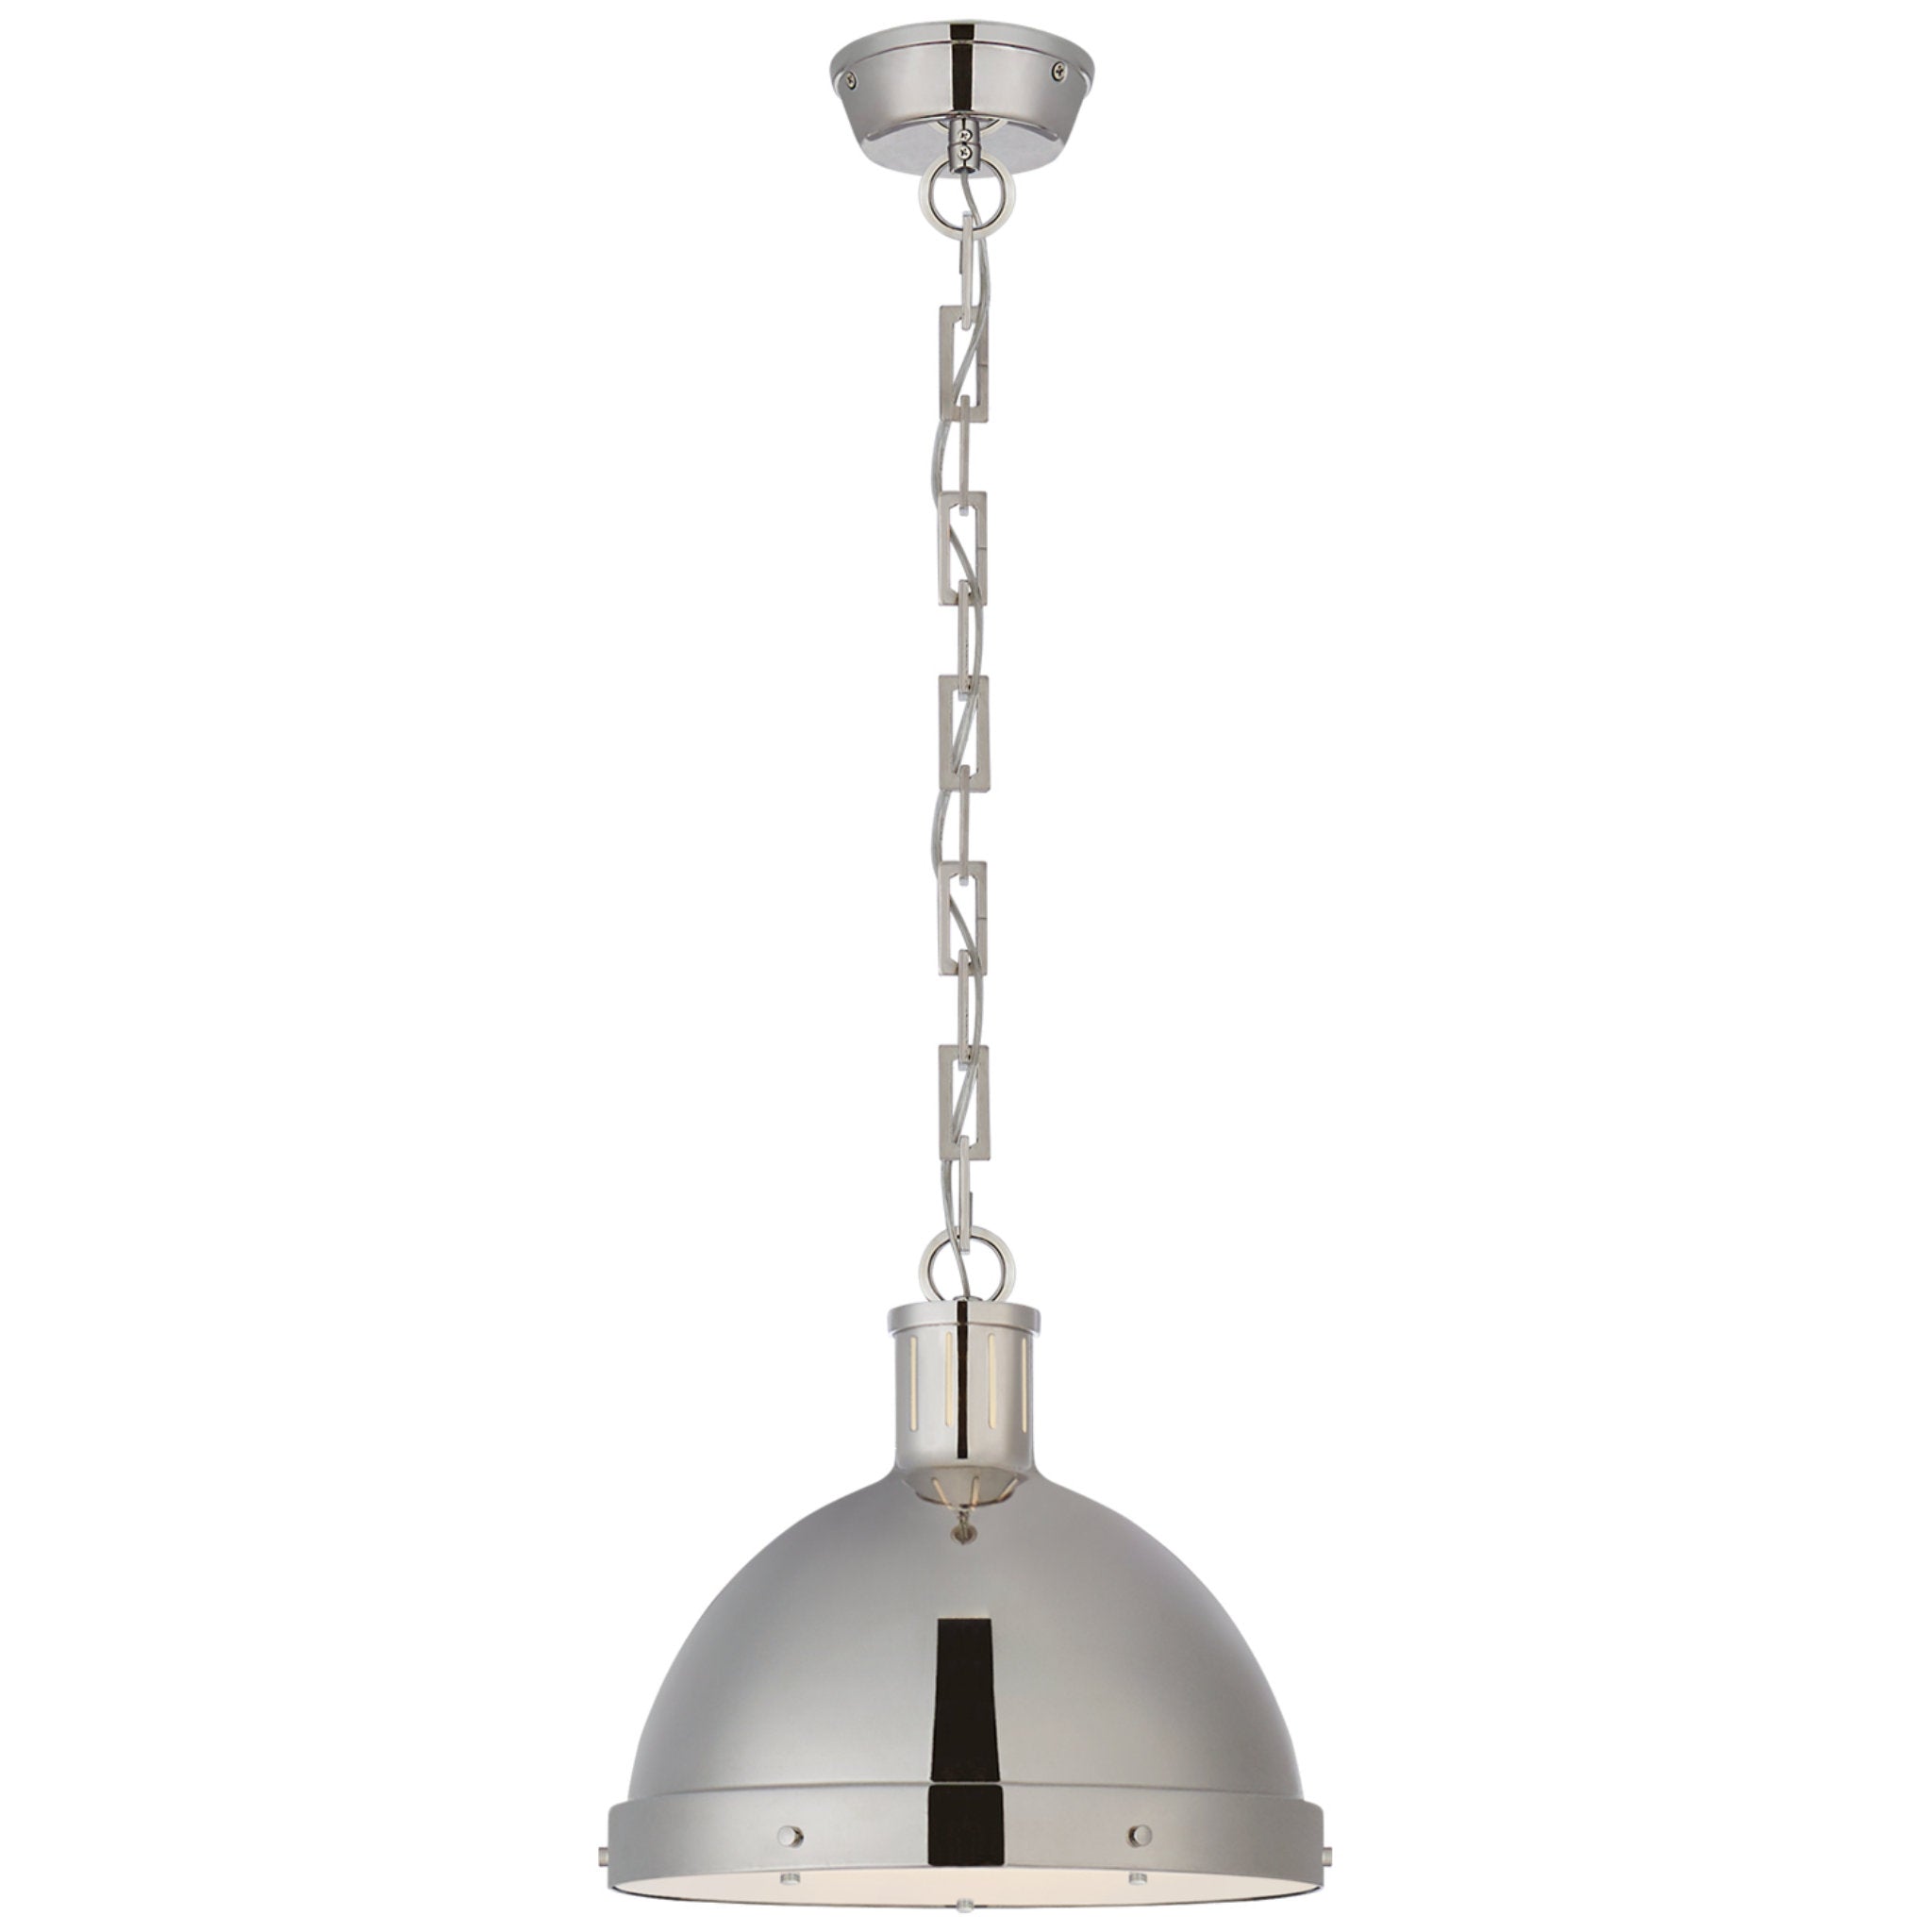 Thomas O'Brien Hicks Large Pendant in Polished Nickel with Acrylic Diffuser